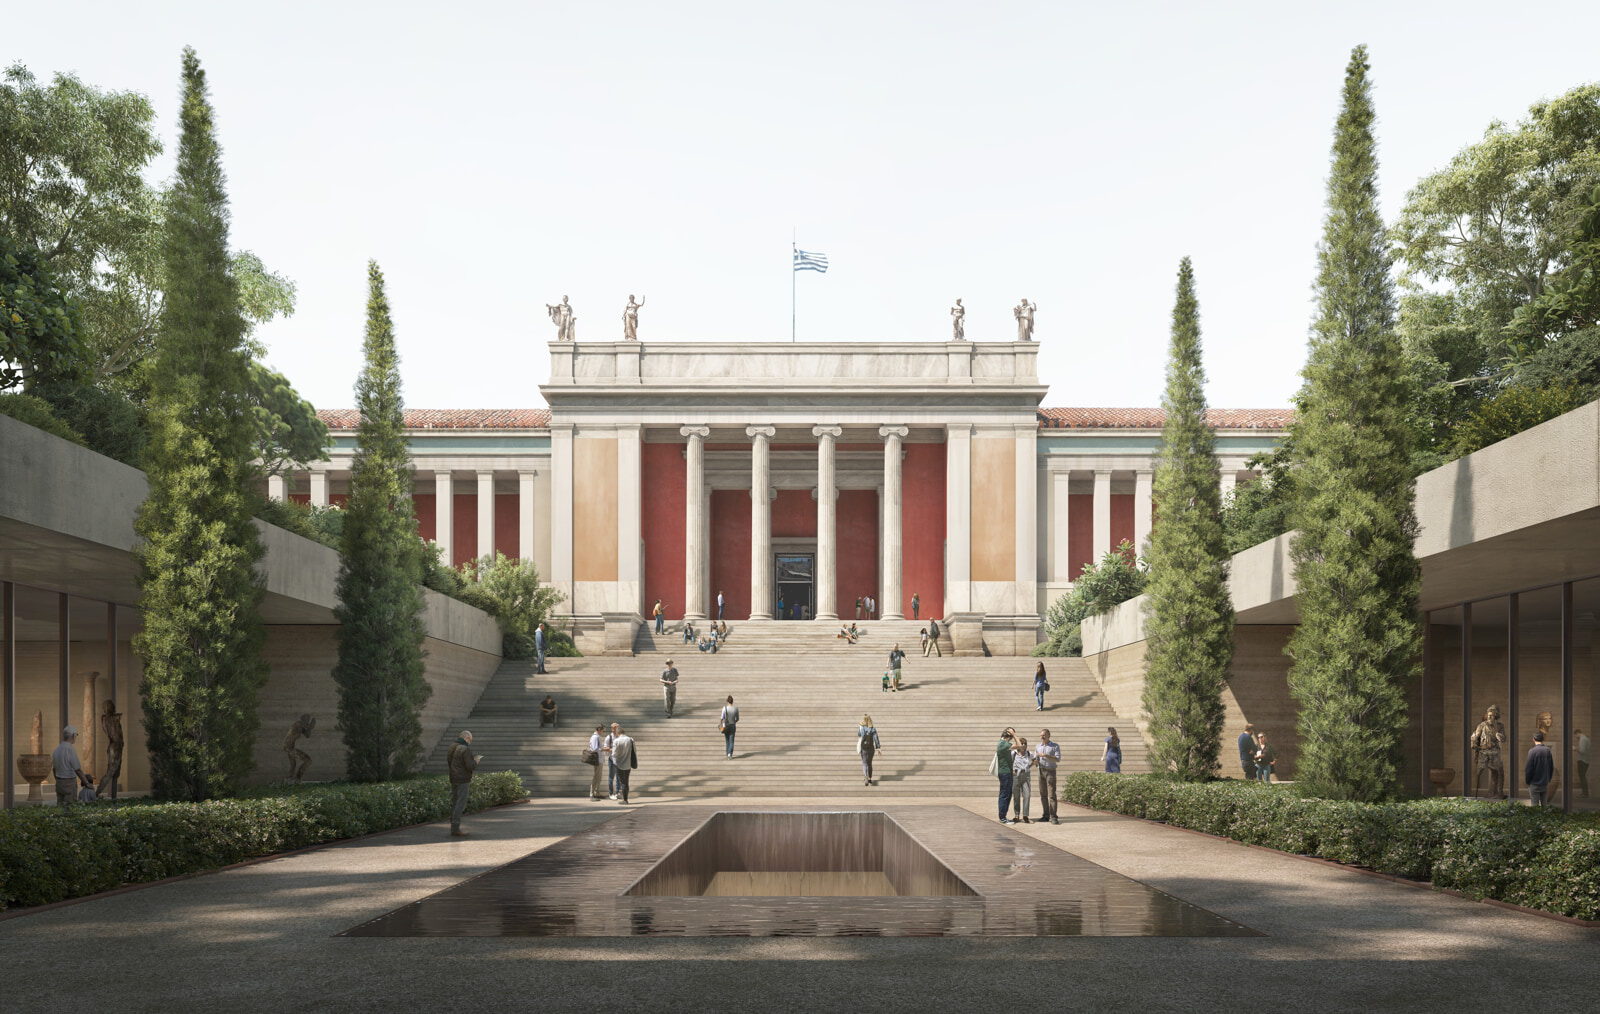 Archisearch David Chipperfield Architects Berlin has won the competition for the National Archaeological Museum in Athens